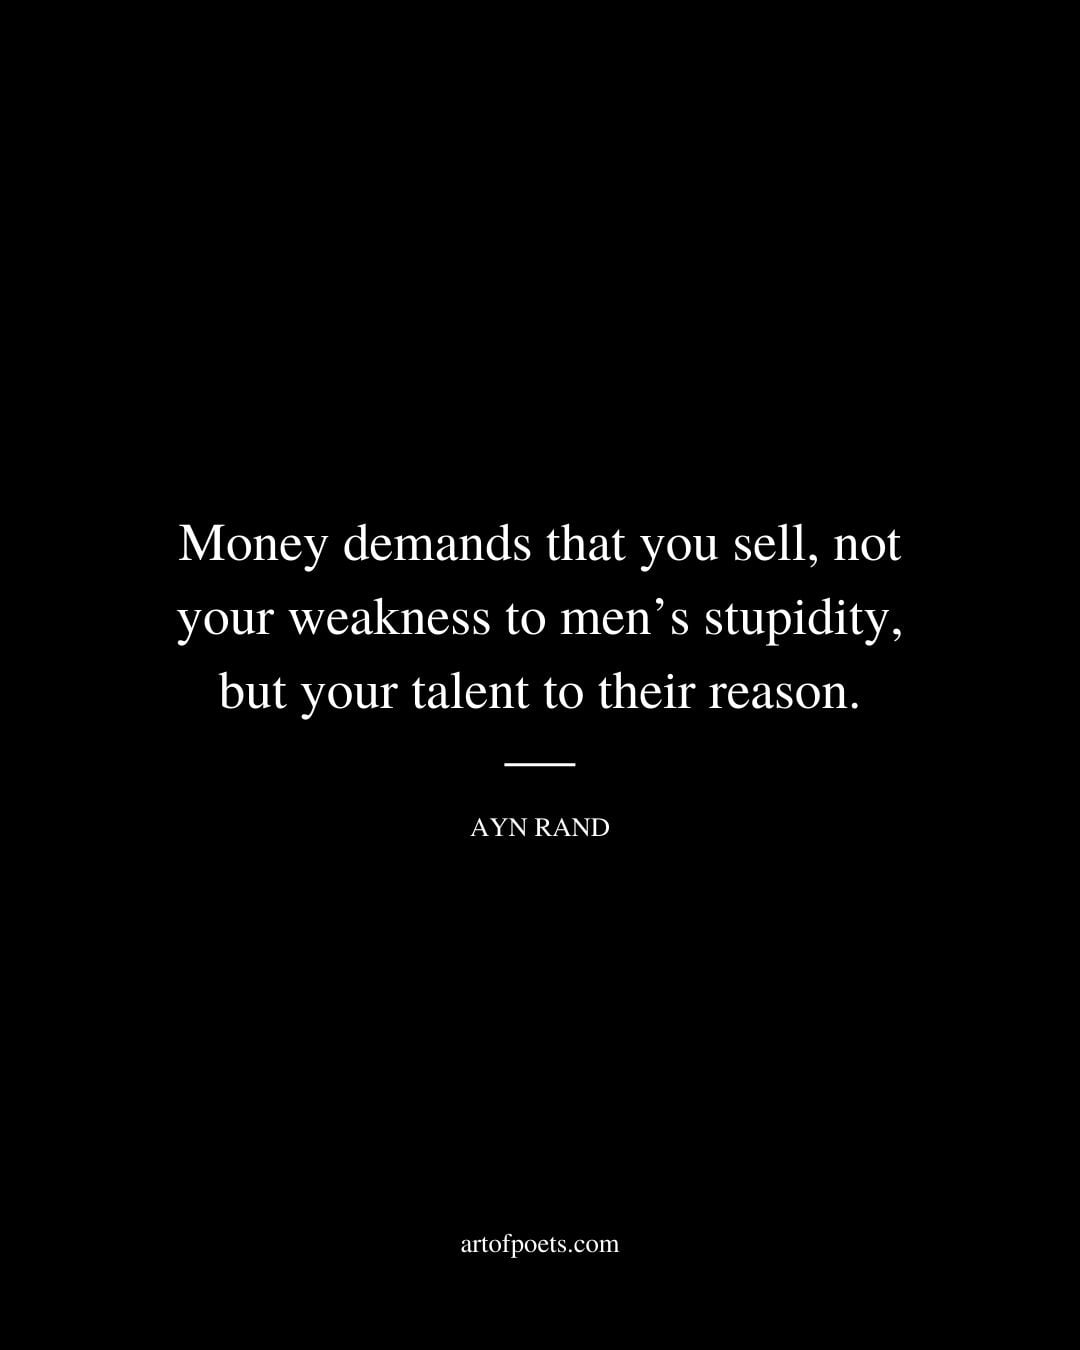 Money demands that you sell not your weakness to mens stupidity but your talent to their reason